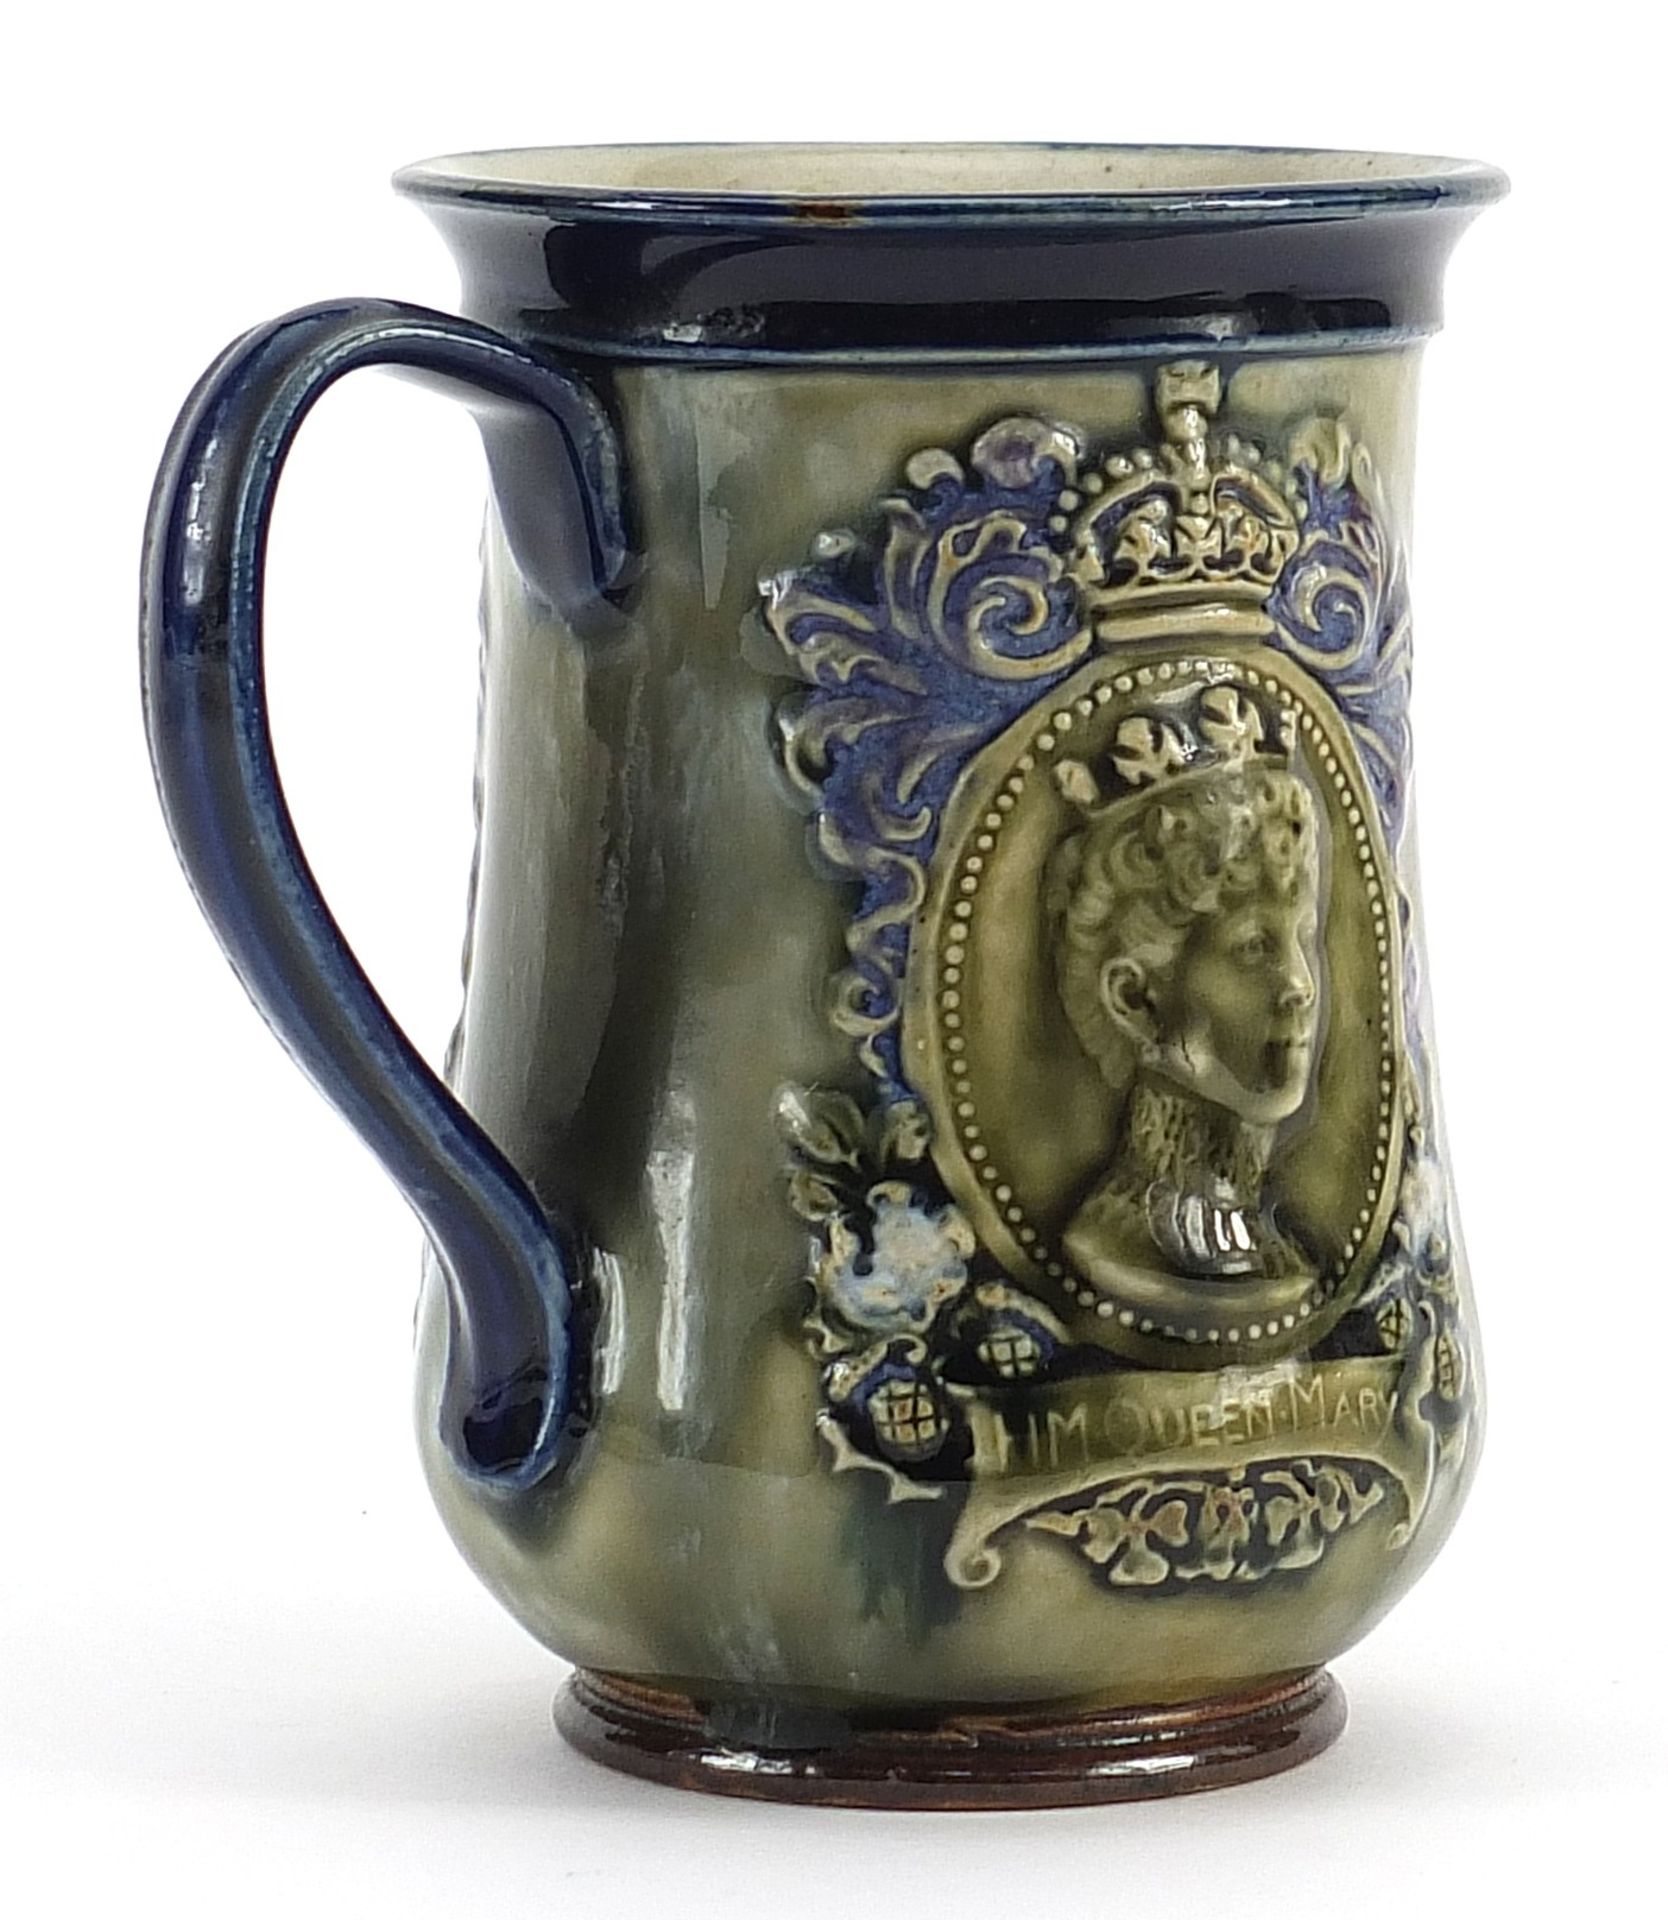 Royal Doulton stoneware mug commemorating the coronation of HM Queen Mary and HM King George V 1911, - Image 3 of 6